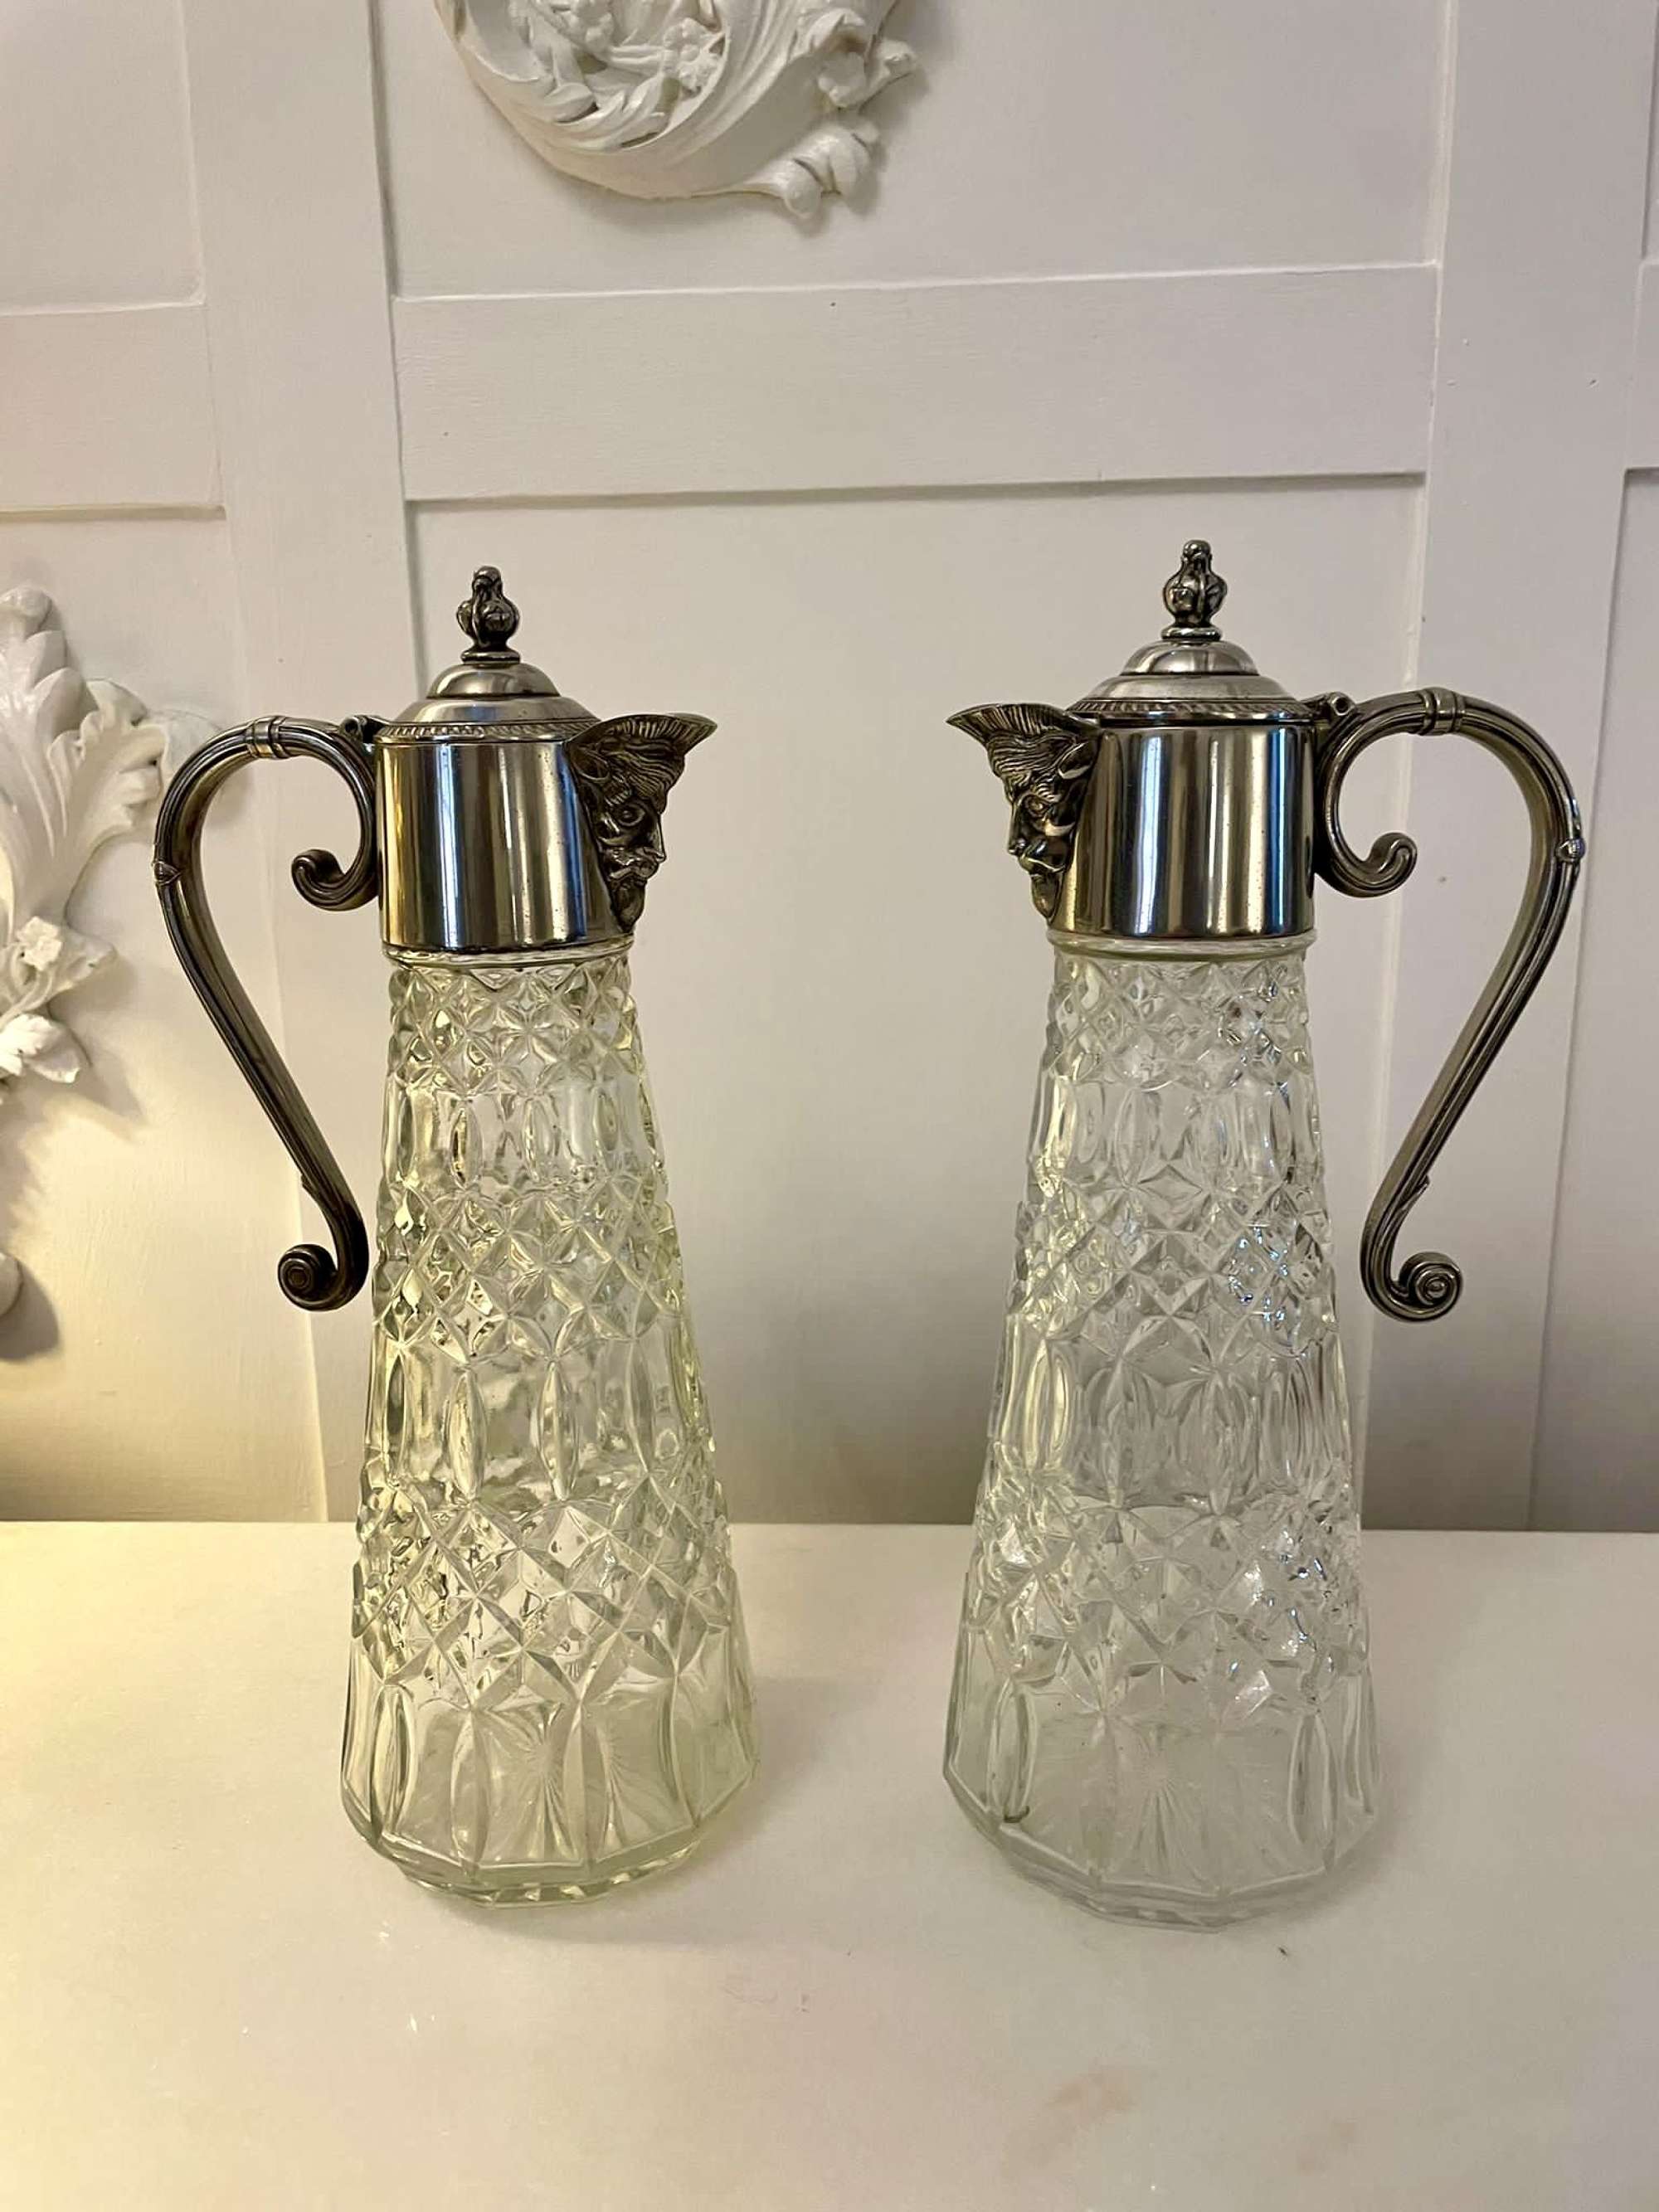 Pair Of Antique Edwardian Quality Silver Plated And Cut Glass Claret Jugs